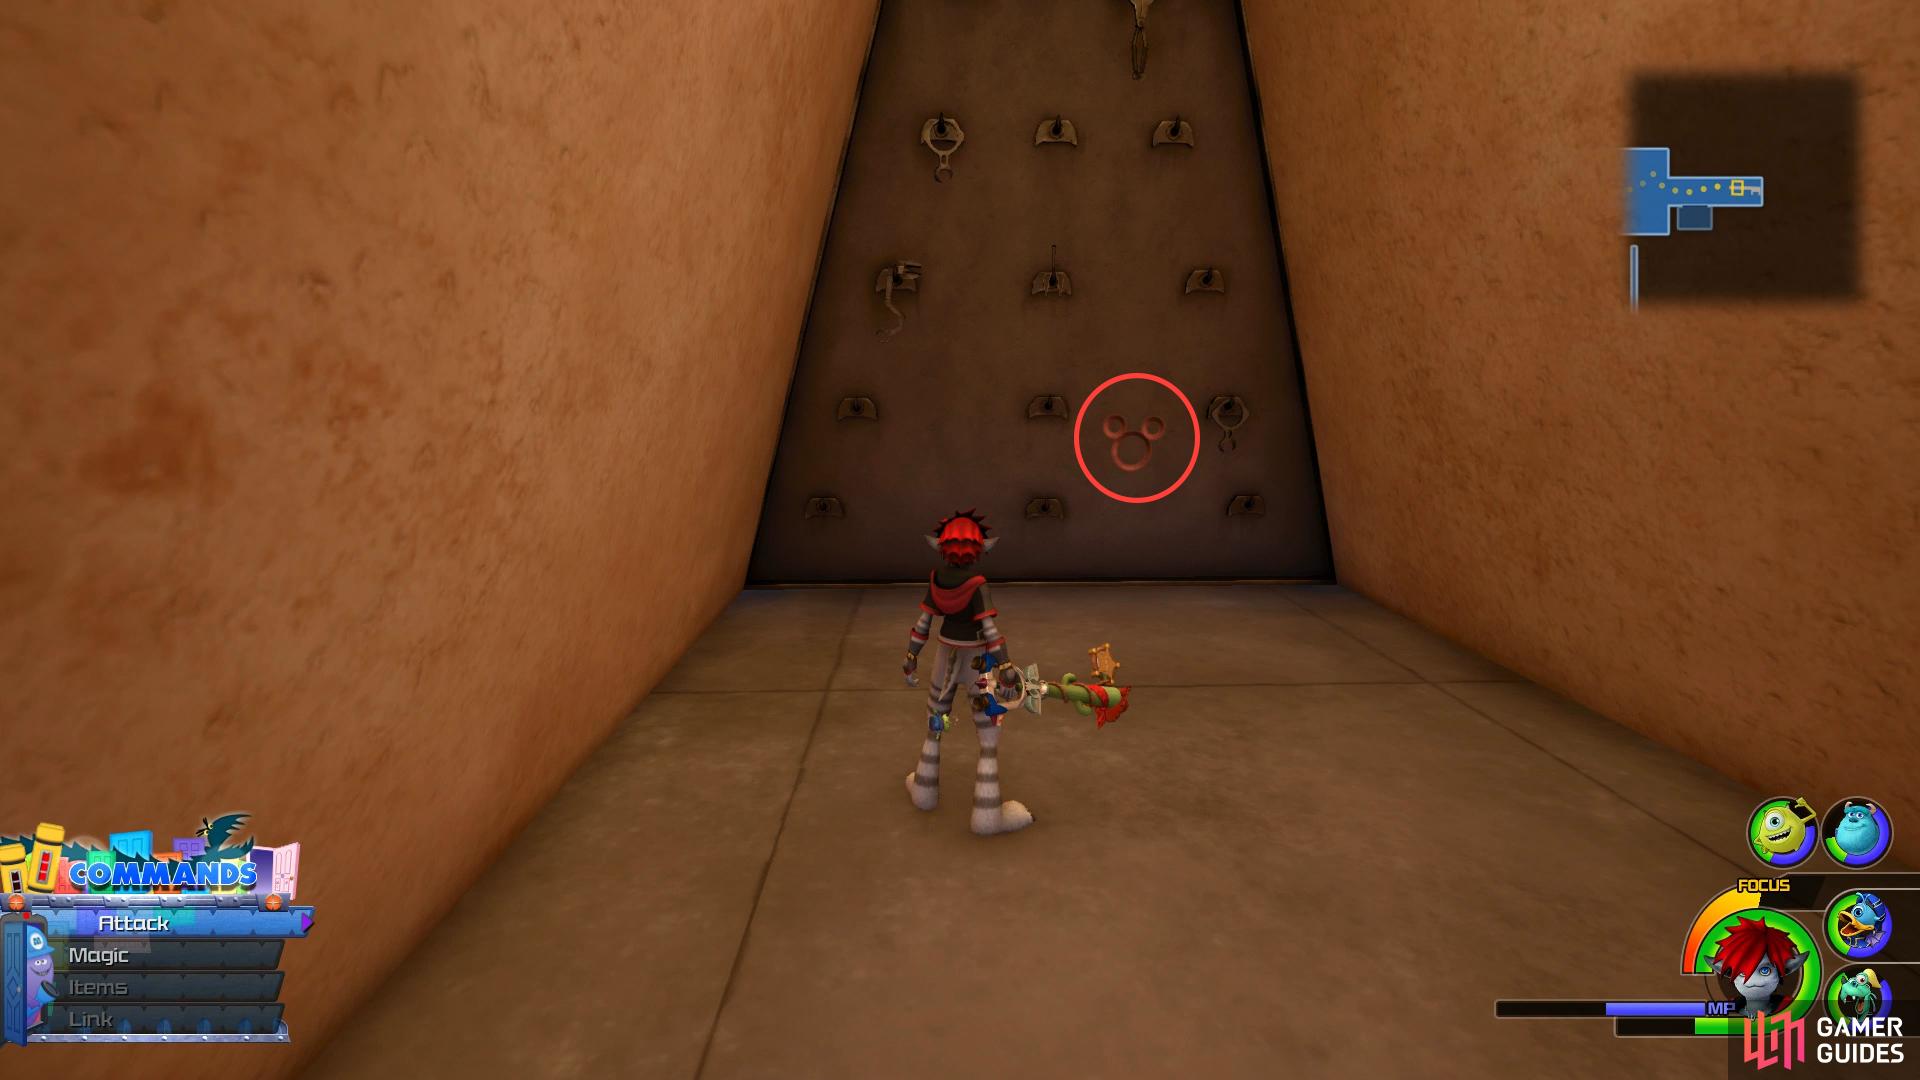 Look on the wall here to discover a Lucky Emblem.